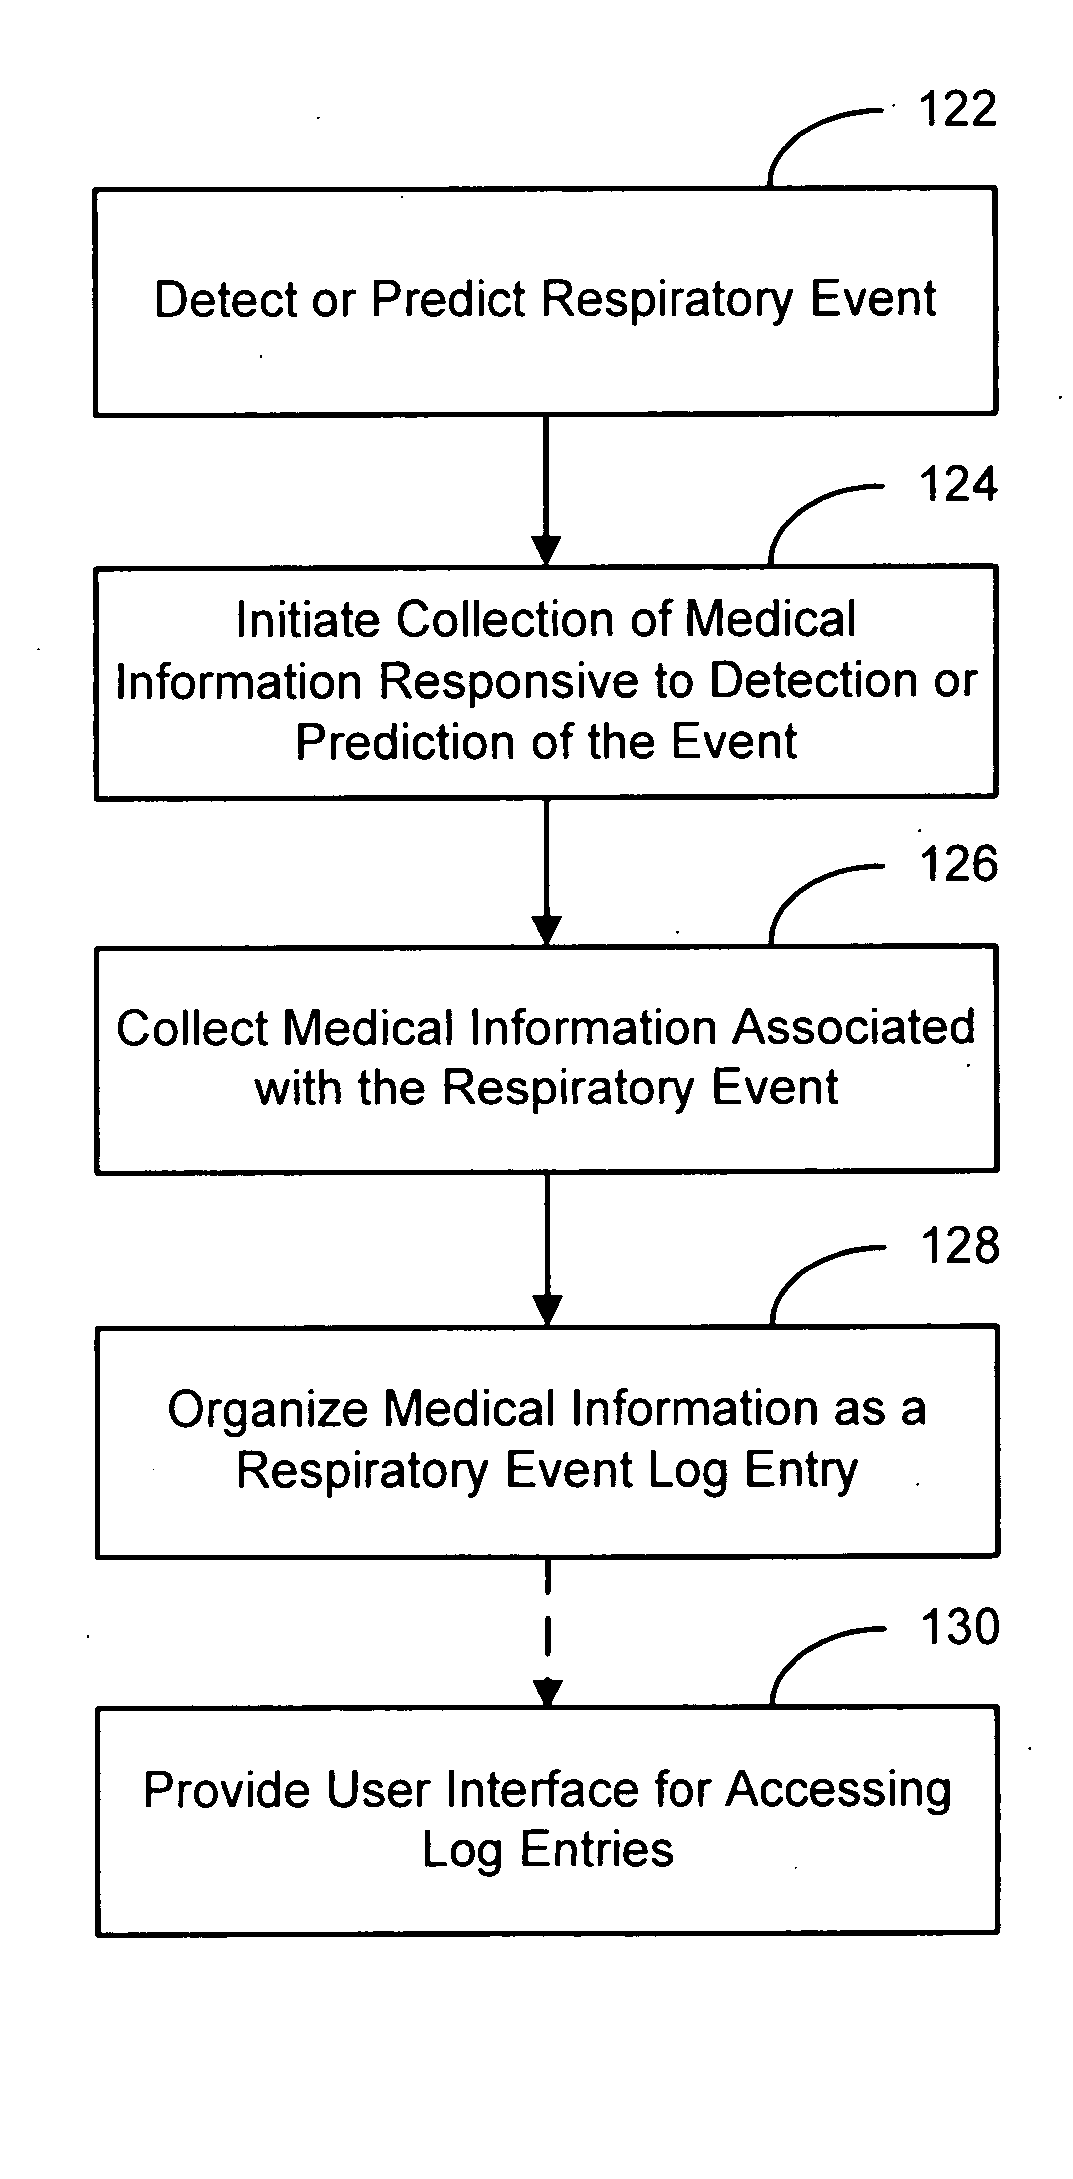 Medical event logbook system and method